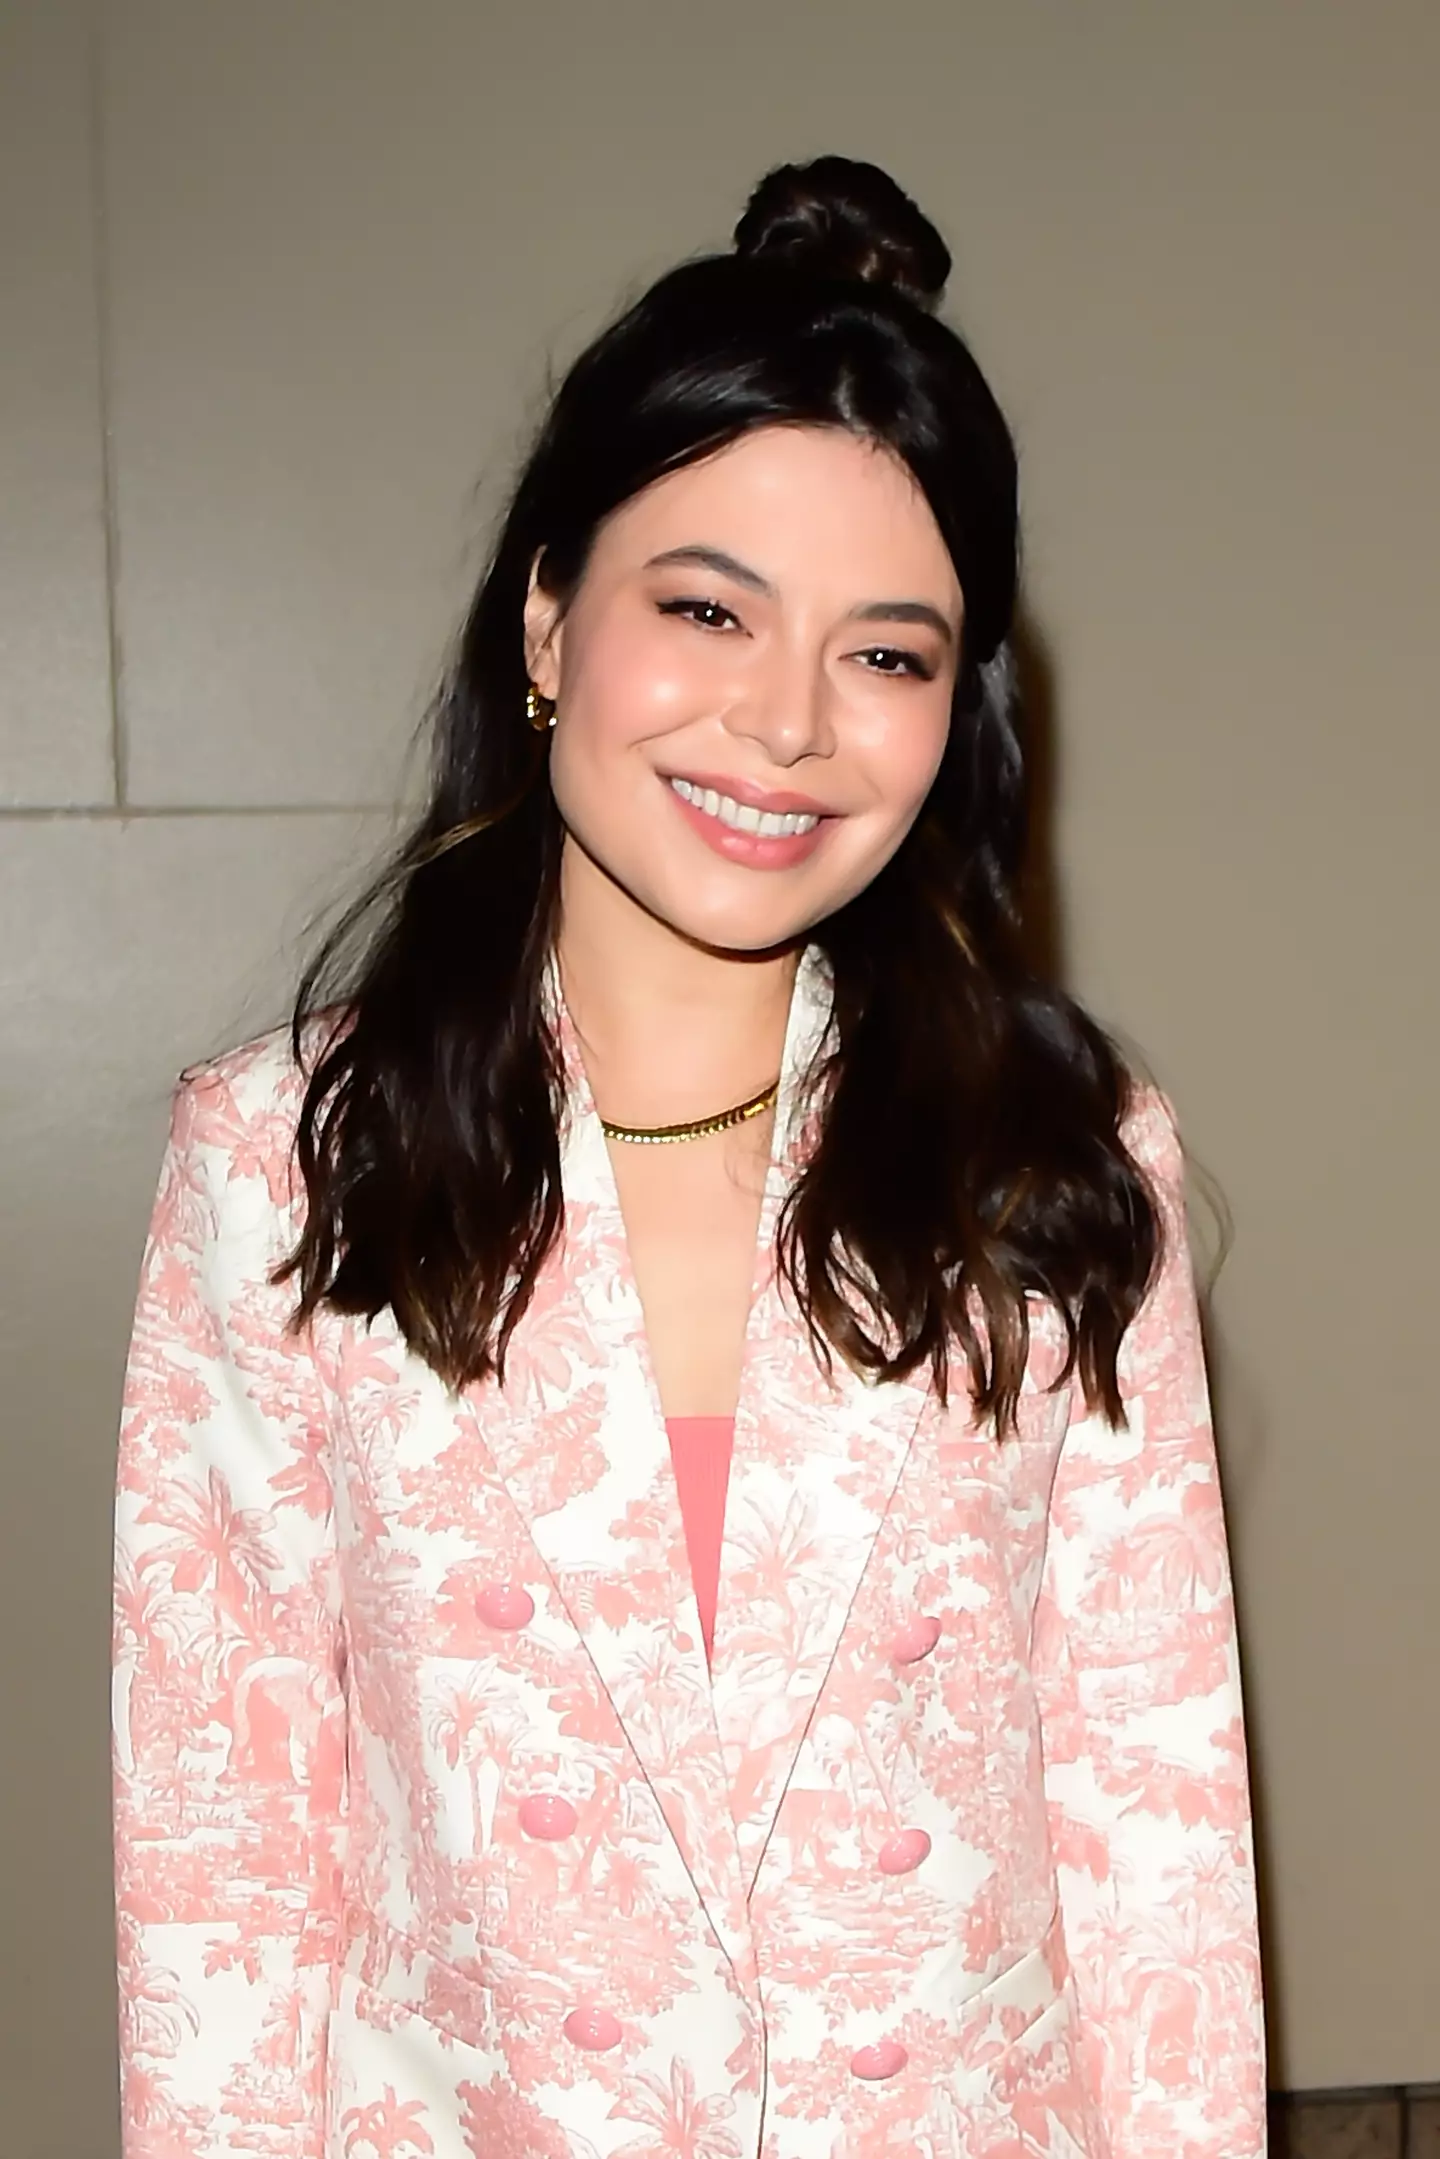 Miranda Cosgrove says she’s never been drunk or smoked in her ‘entire life’